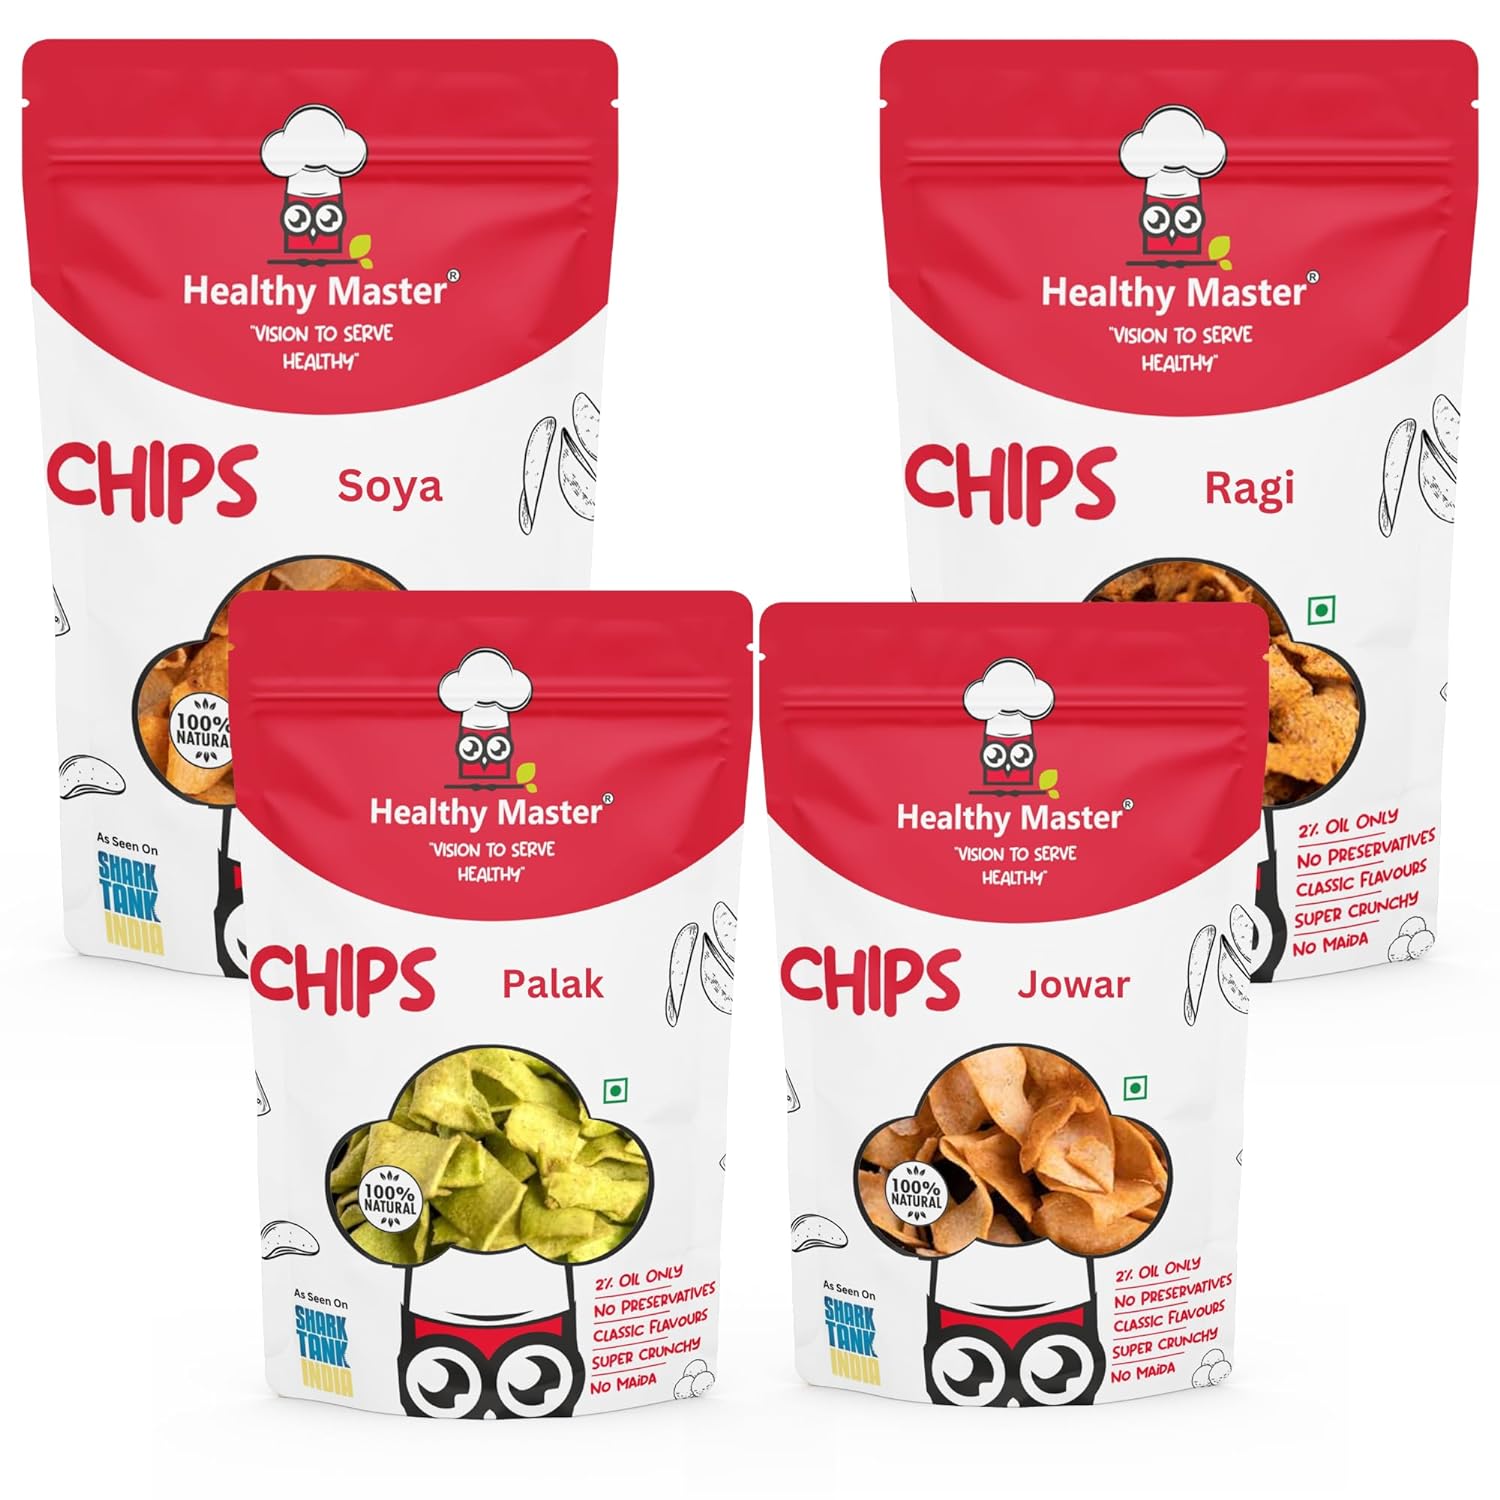 Healthy Master Vision To Serve Healthy Baked Chips (Soya, Ragi, Palak, Jower), 100 gm Each - Pack of 4